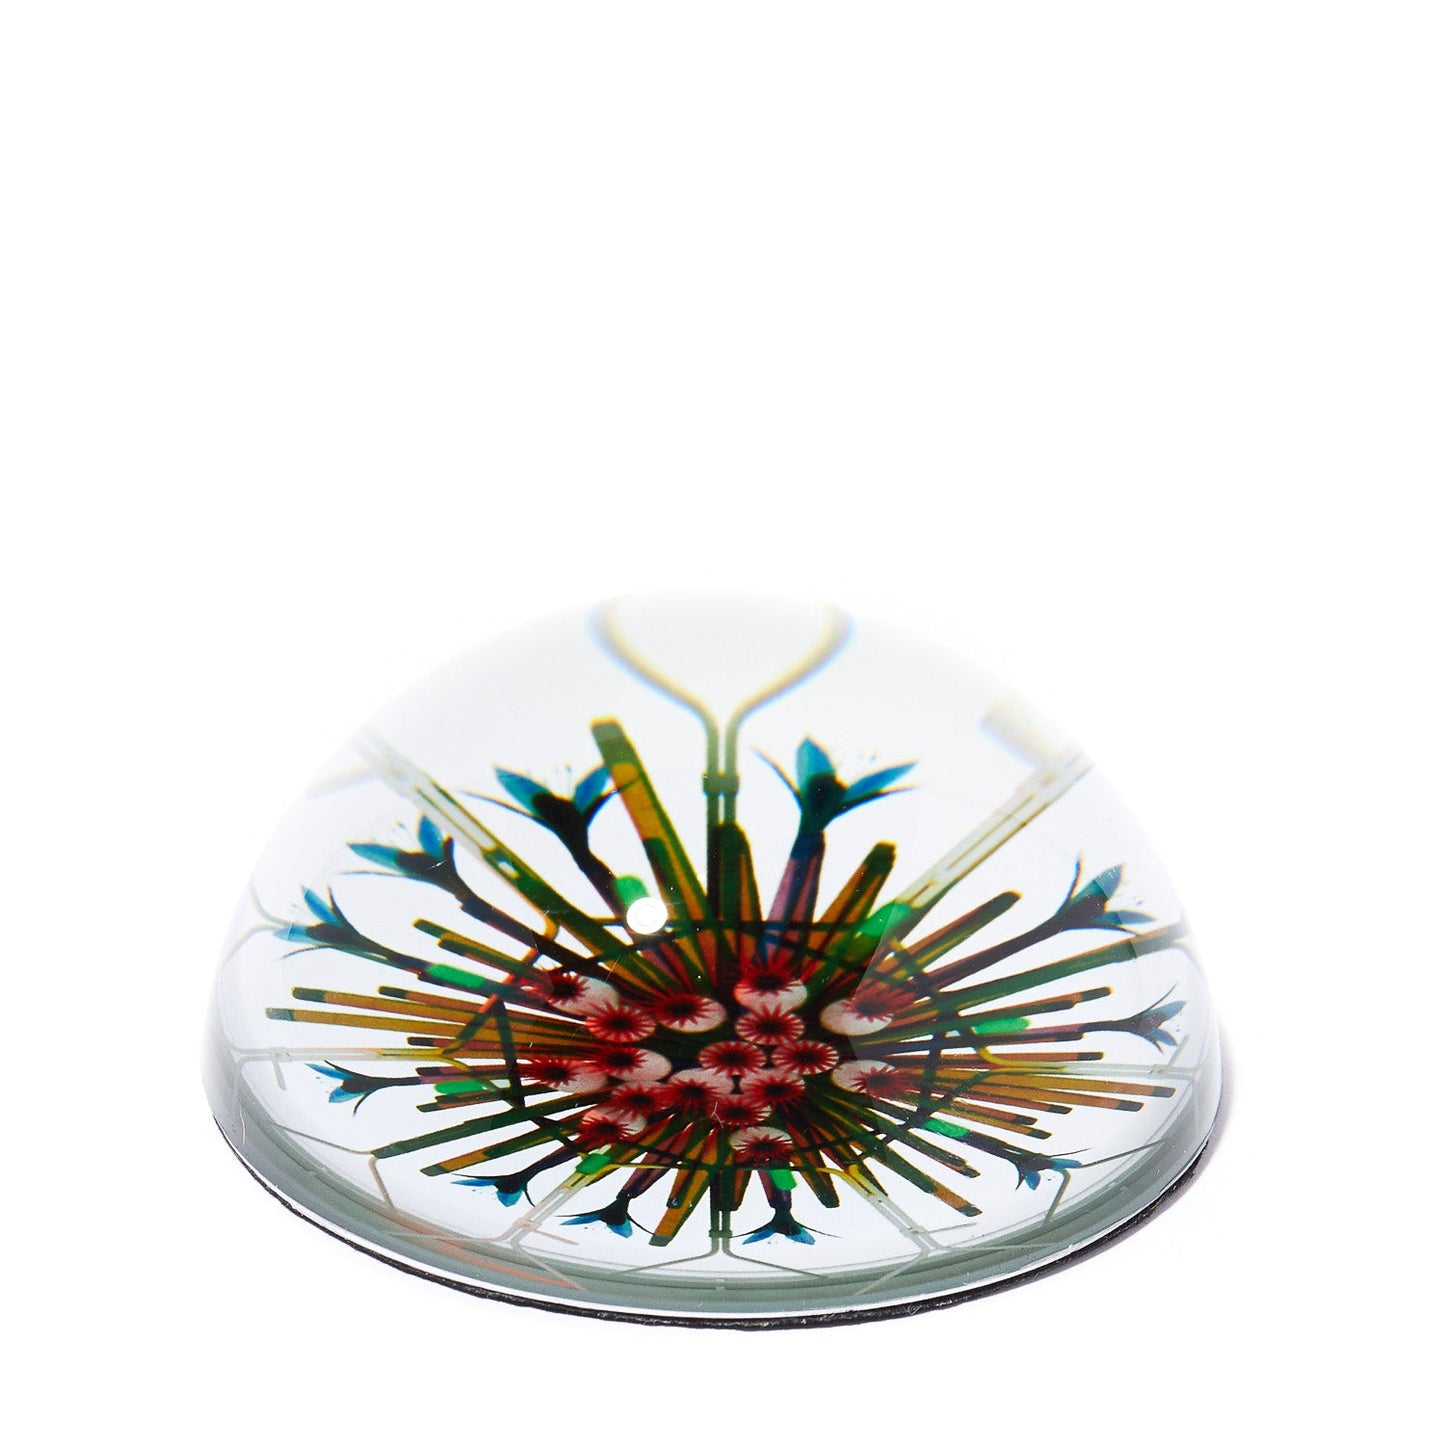 THE OBSERVATORY CACTUS PAPERWEIGHT